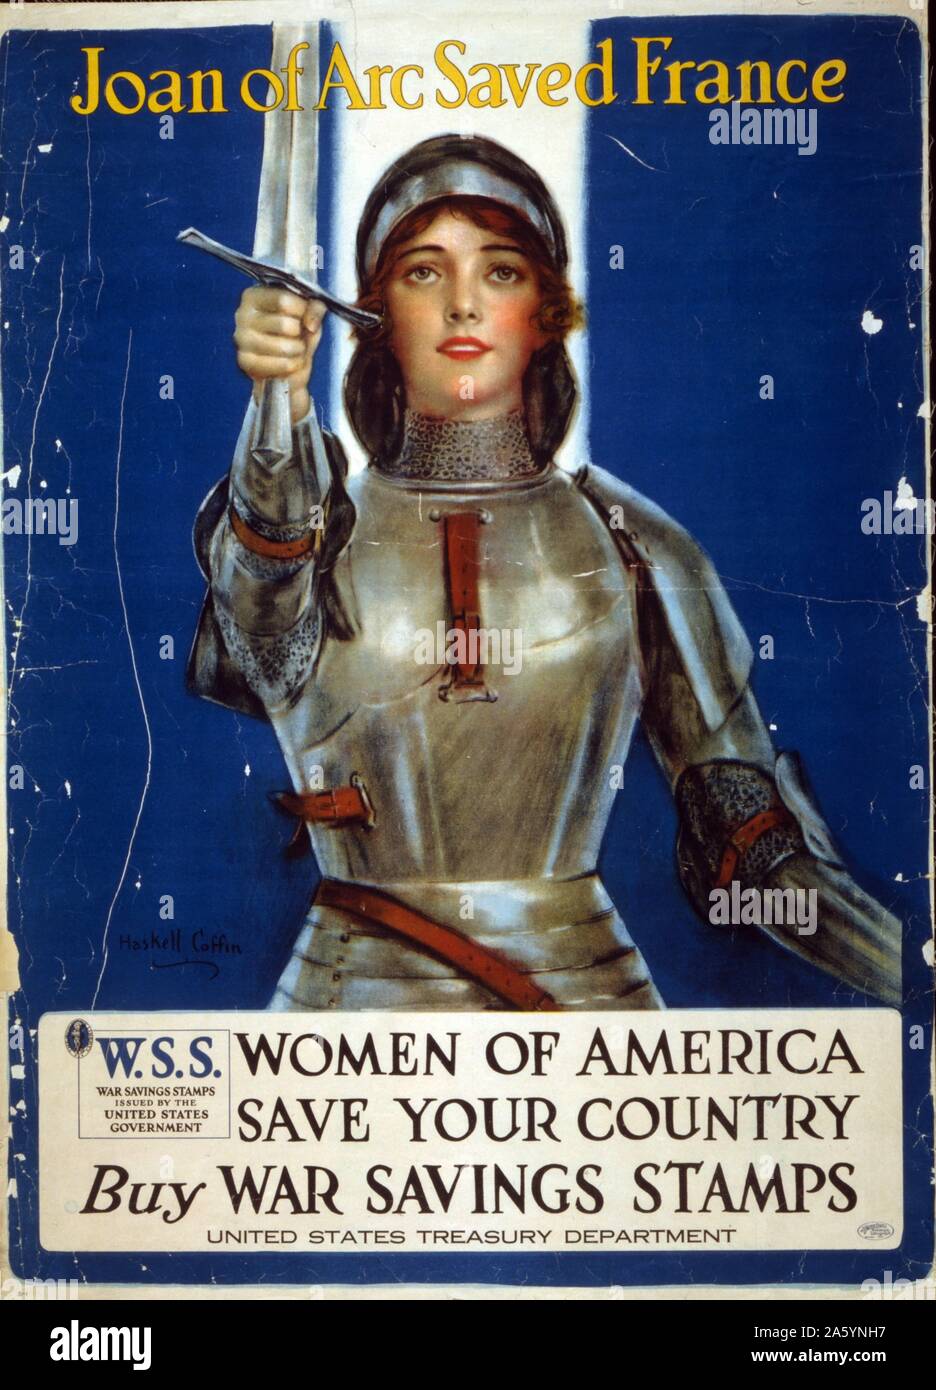 Joan of Arc saved France. Women of America, save your country--Buy War Savings Stamps [1918]. (poster) lithograph, colour showing Joan of Arc raising a sword. Stock Photo